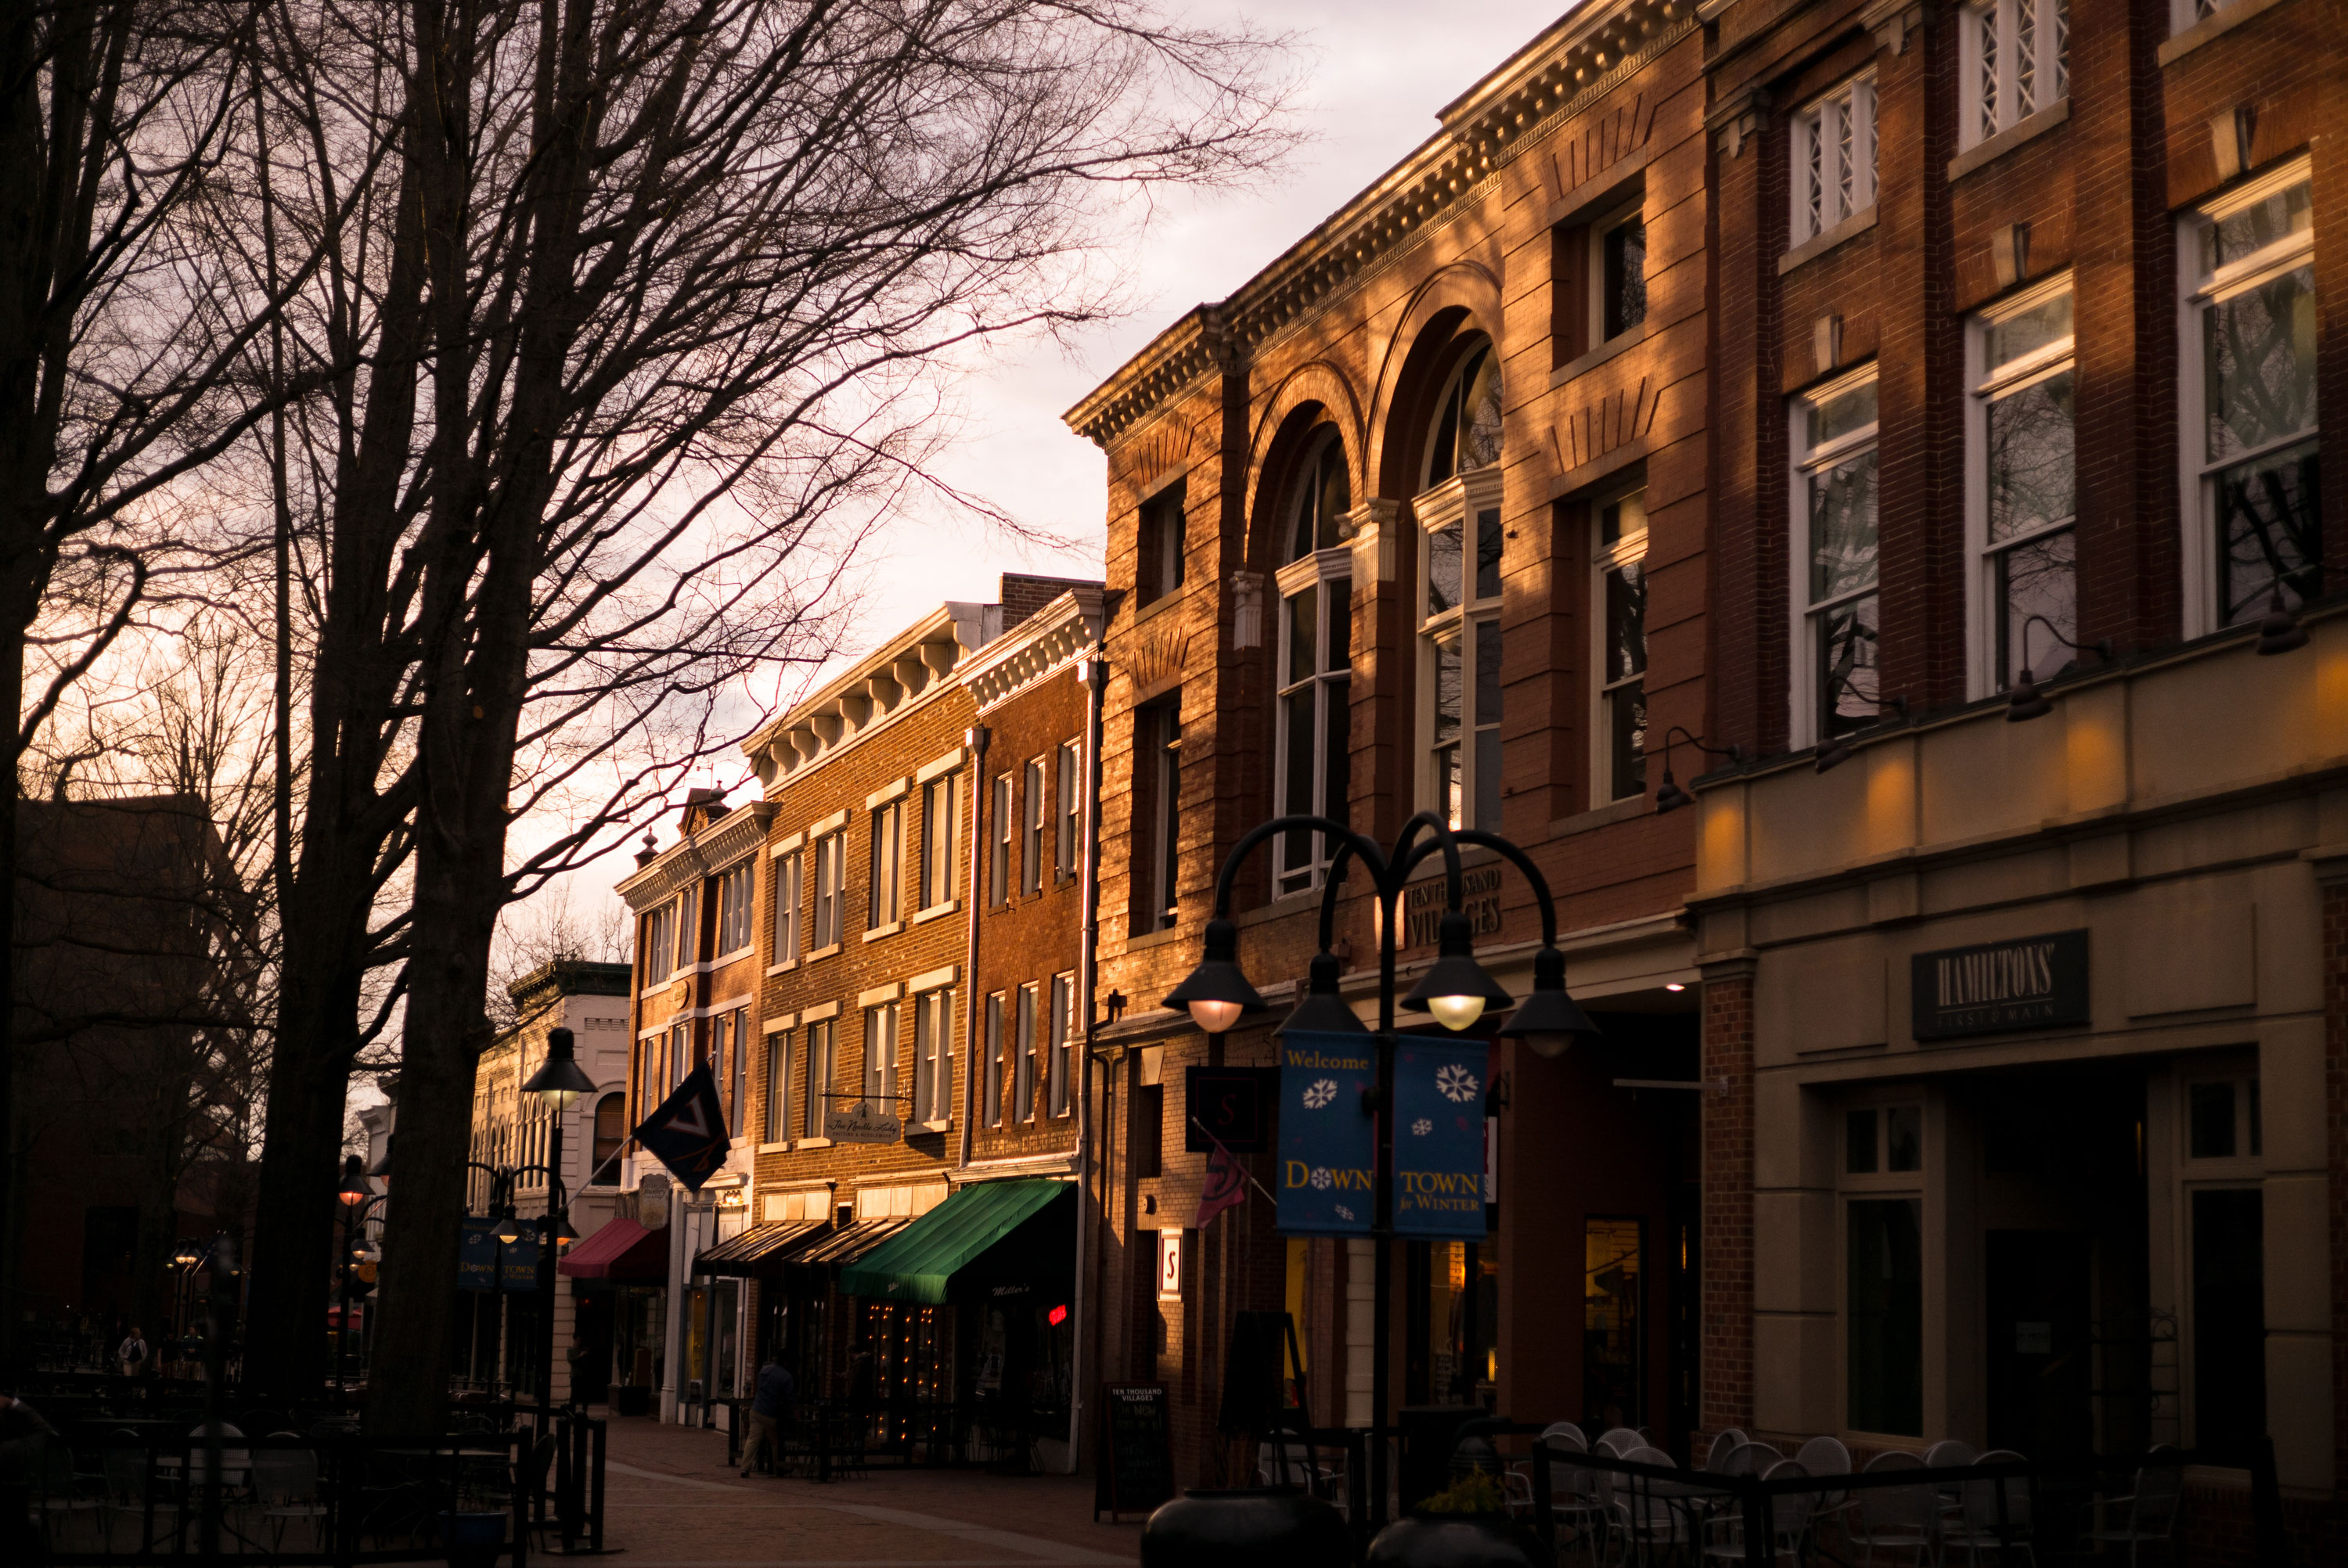 Brick buildings on the downtown mall at sunset